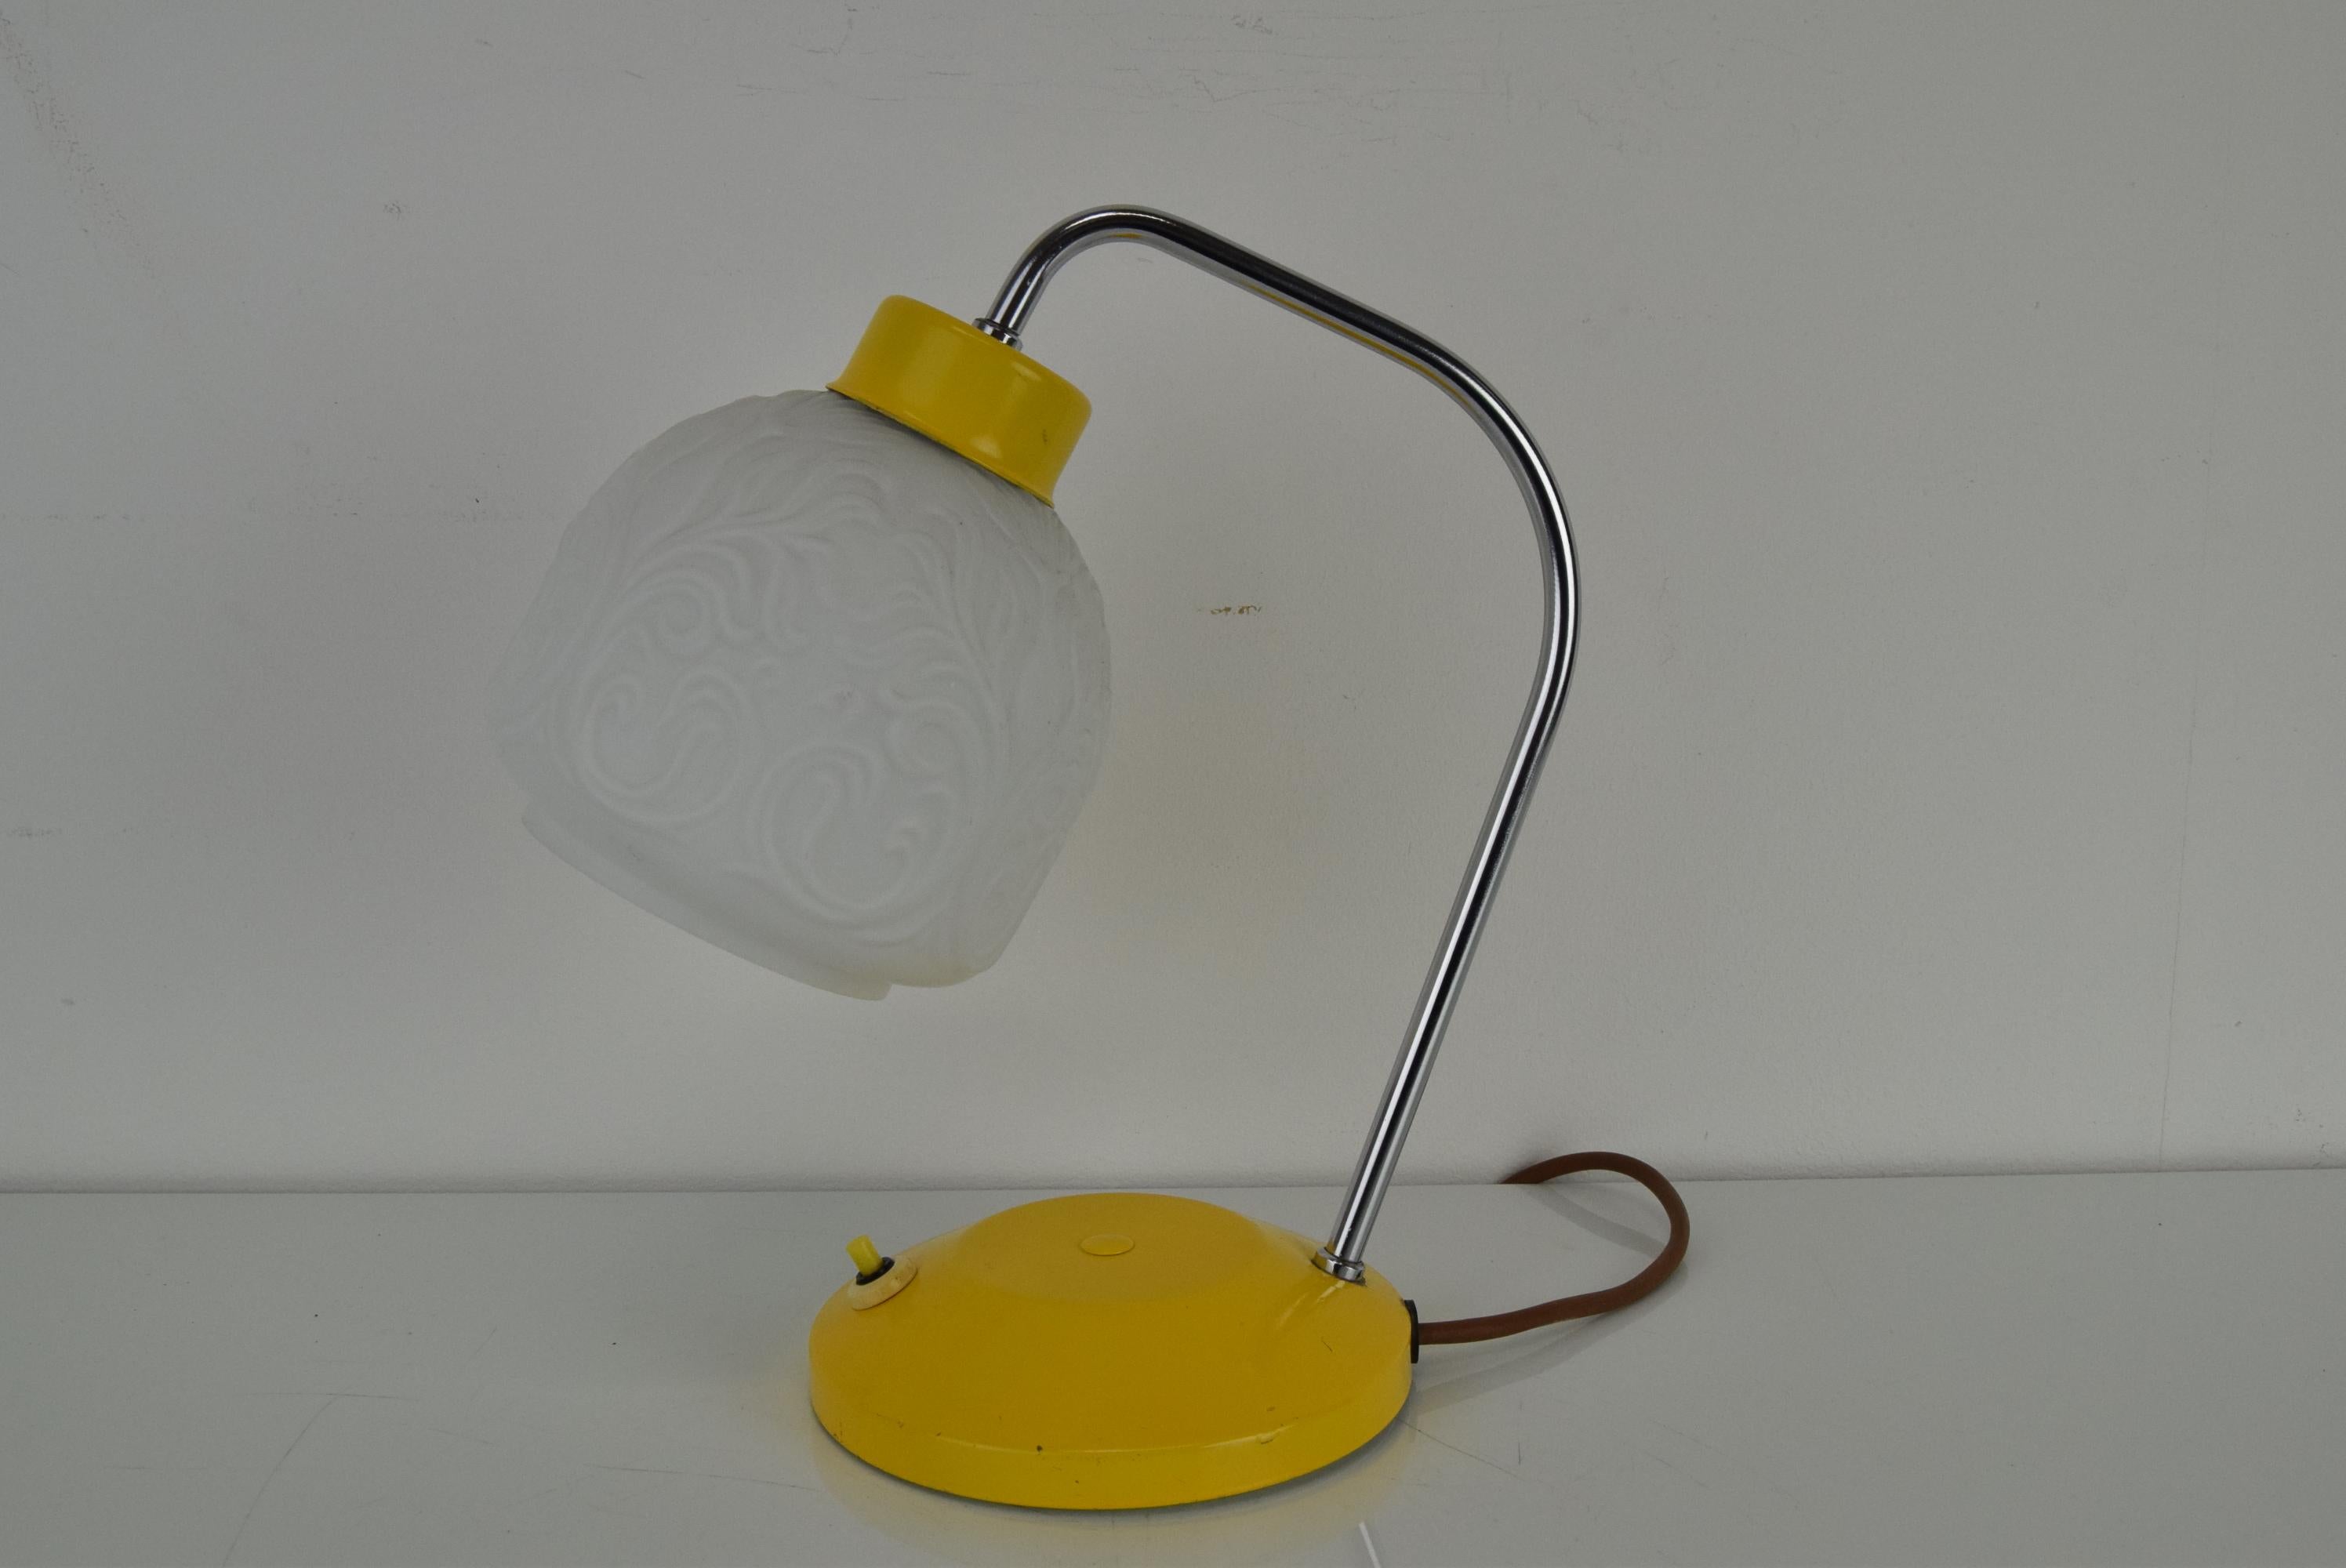 Made in Czechoslovakia 
Made of glass, Lacquered metal, chrome
With aged patina
Re-polished
1x60W,E27 or E26 bulb
US adapter included
Good original condition.